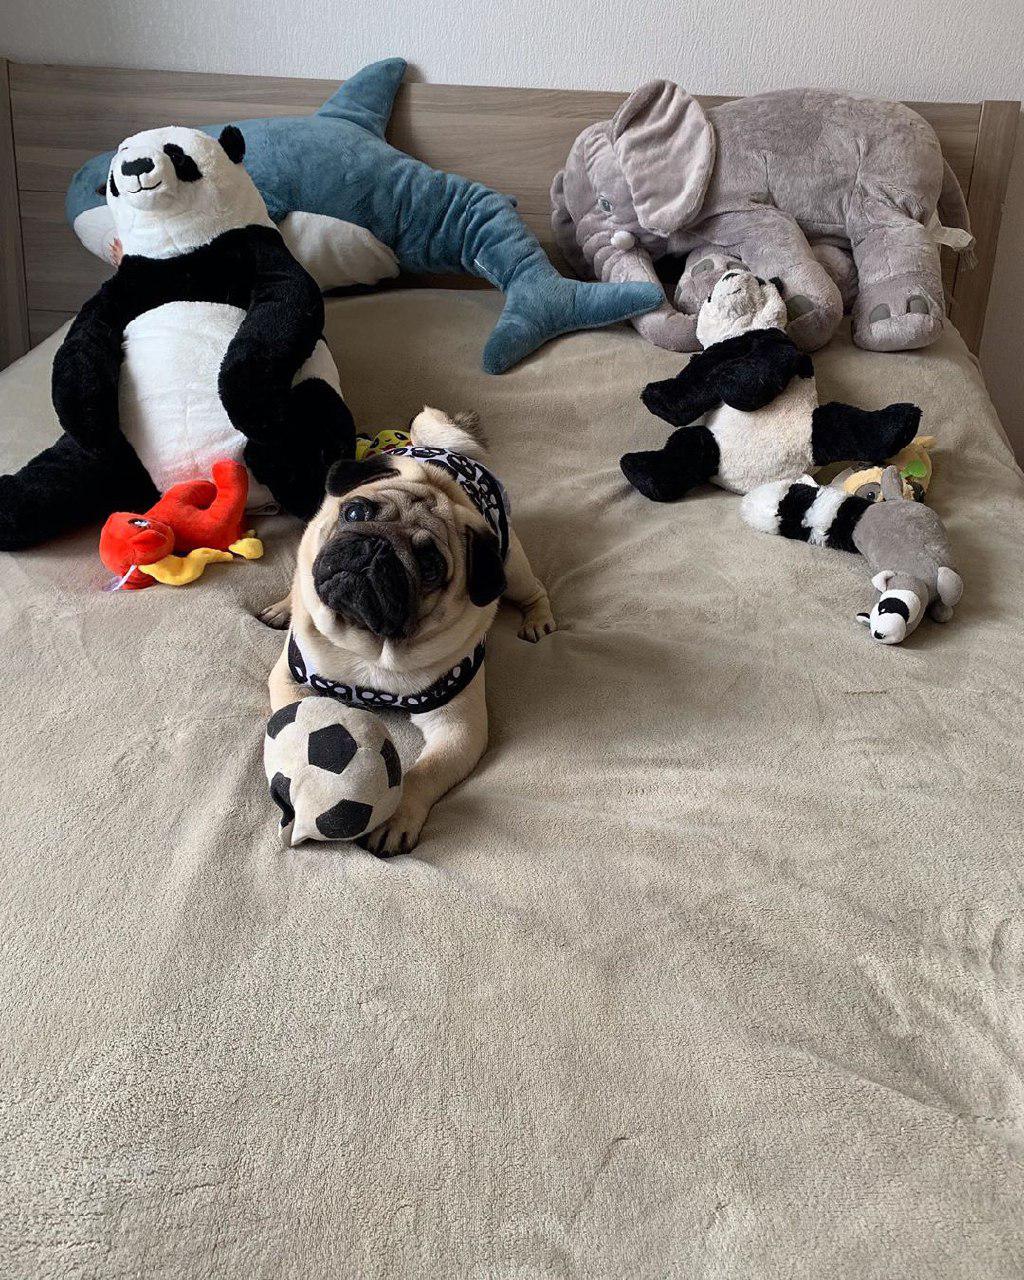 A Pug lying on the bed with a ball along with its stuffed toys